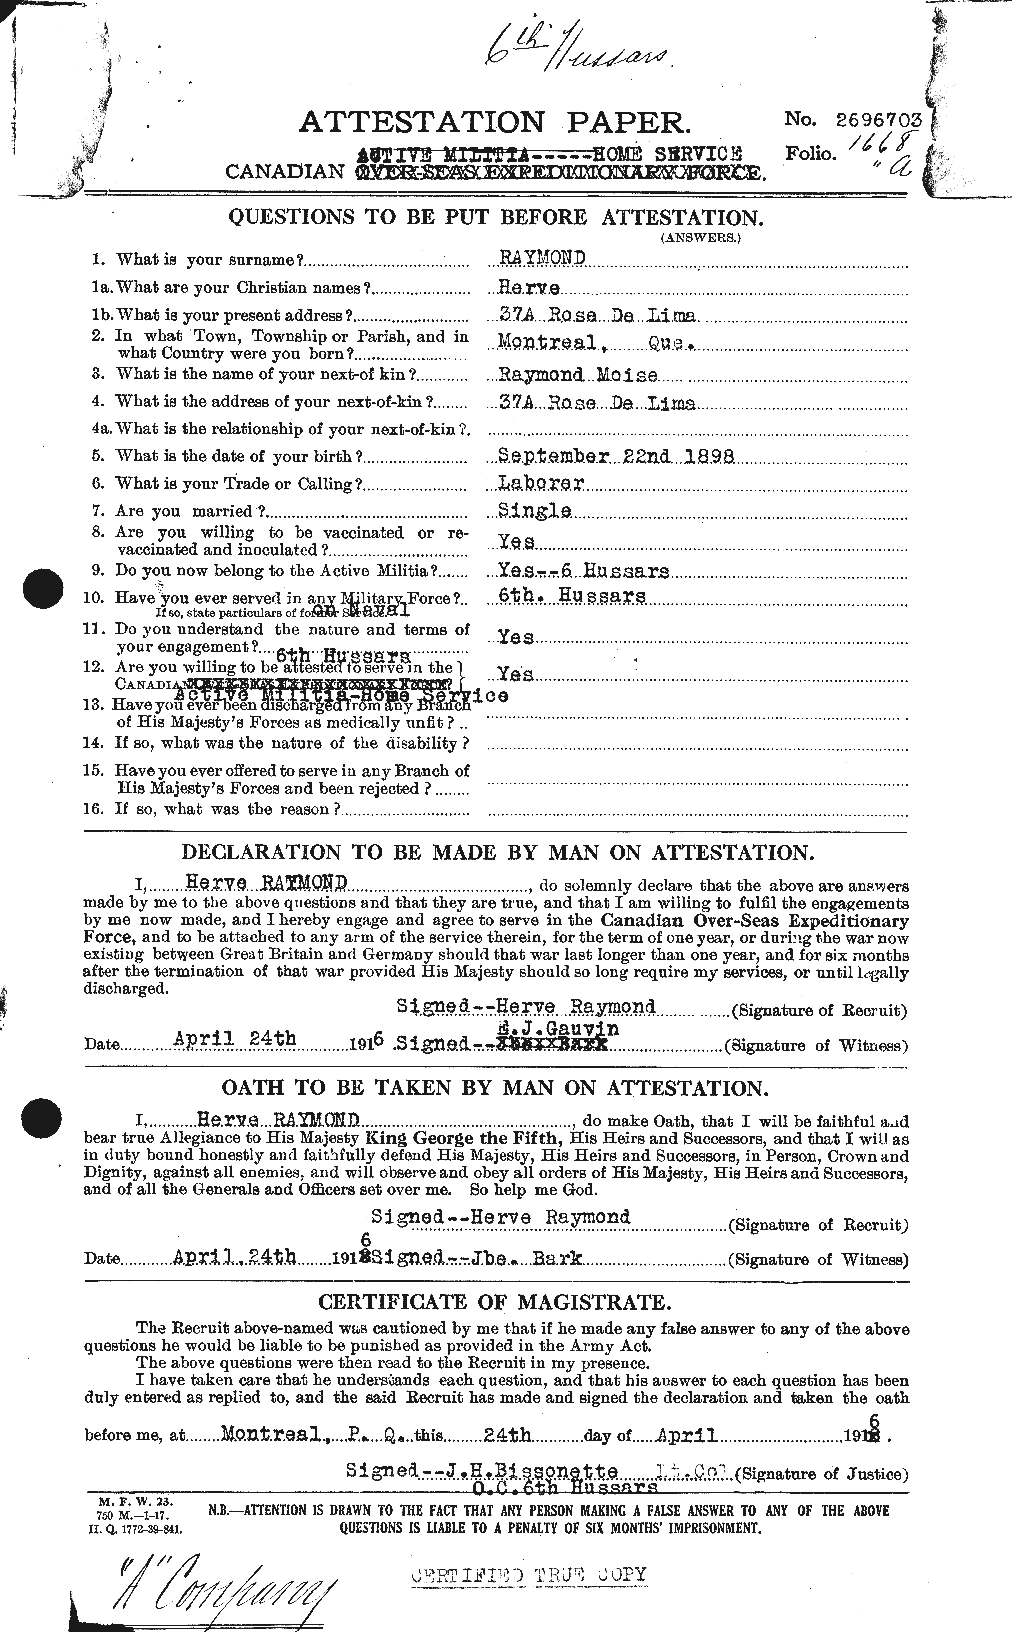 Personnel Records of the First World War - CEF 595358a